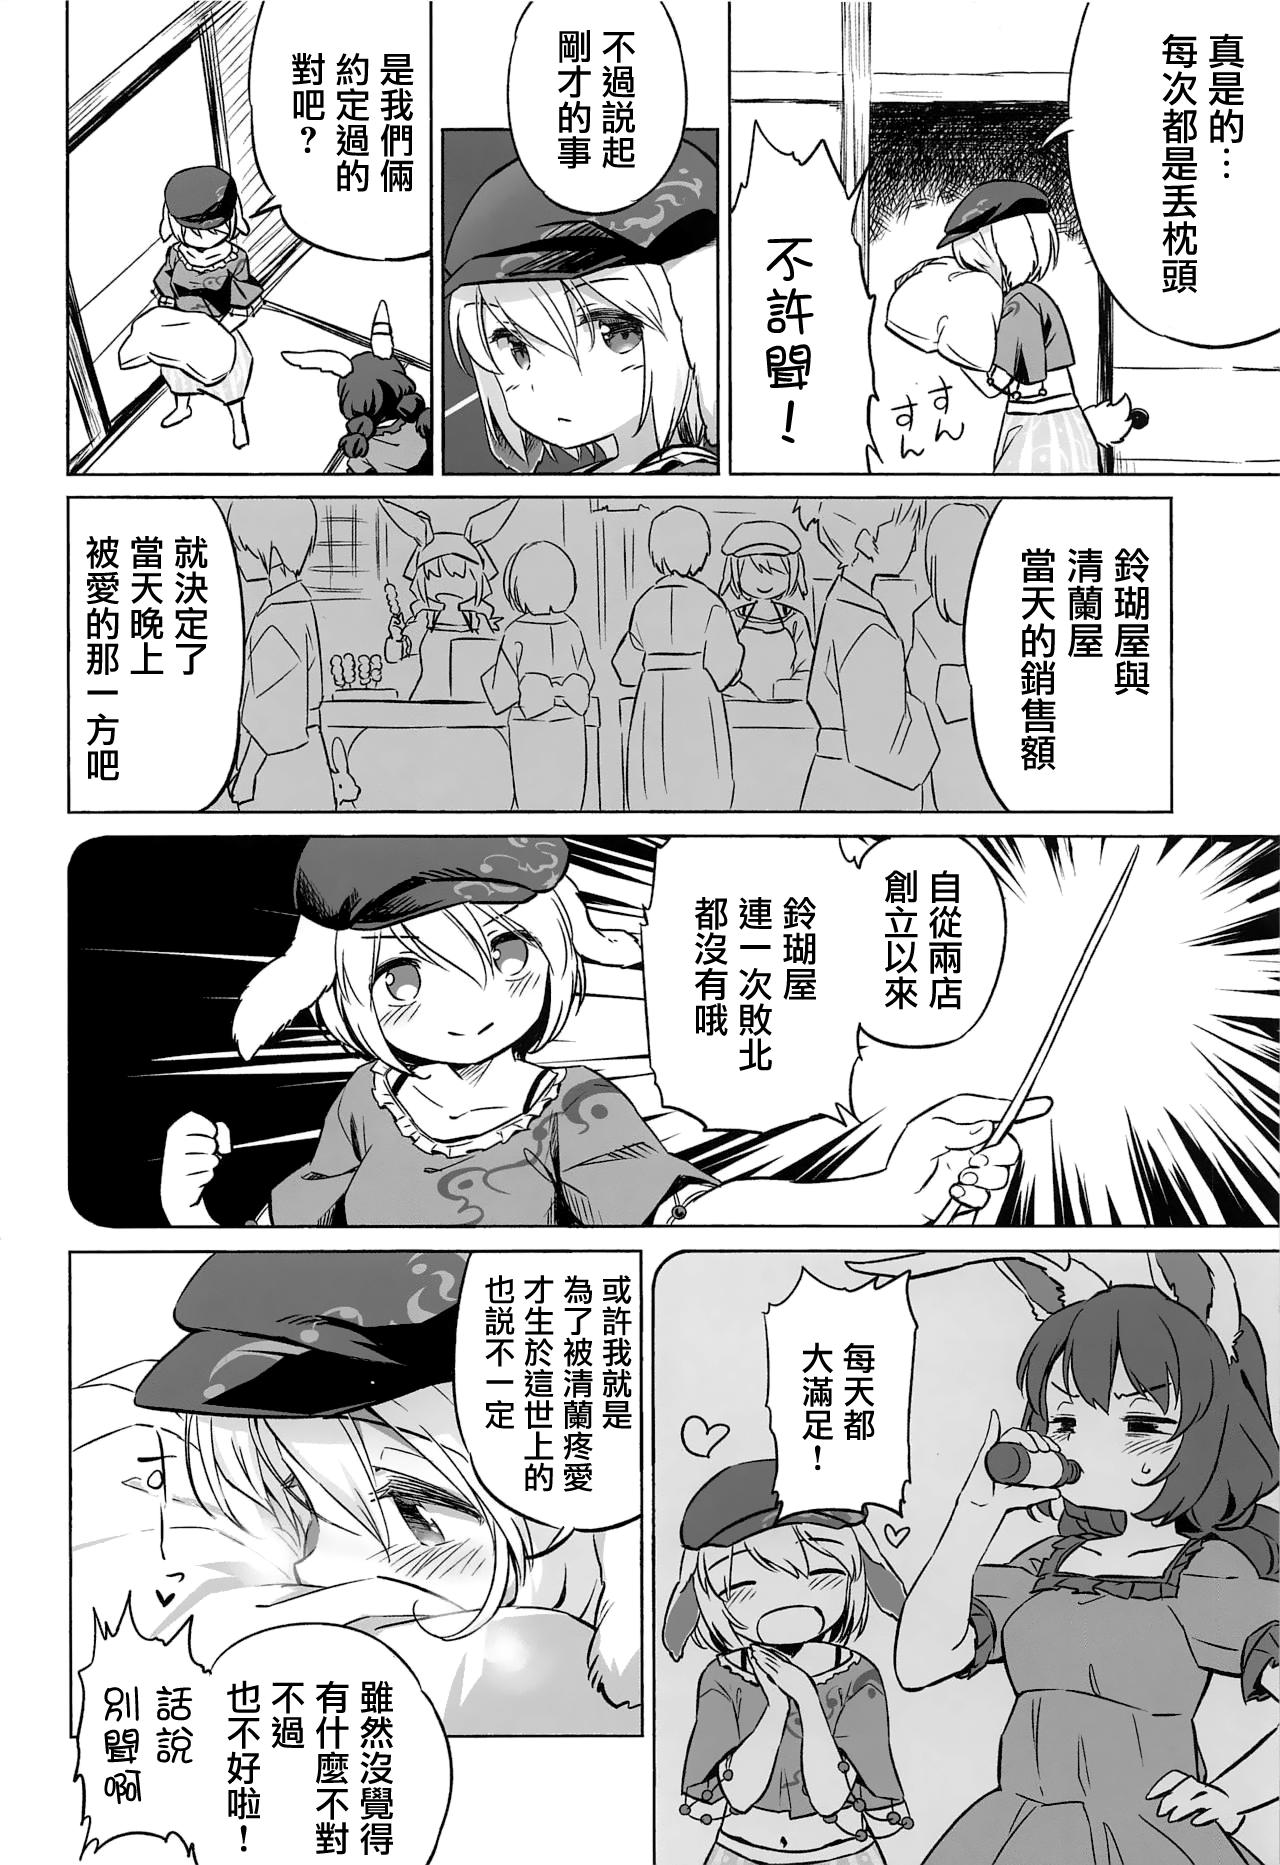 With Granny Smith Mating - Touhou project Nice Ass - Page 7